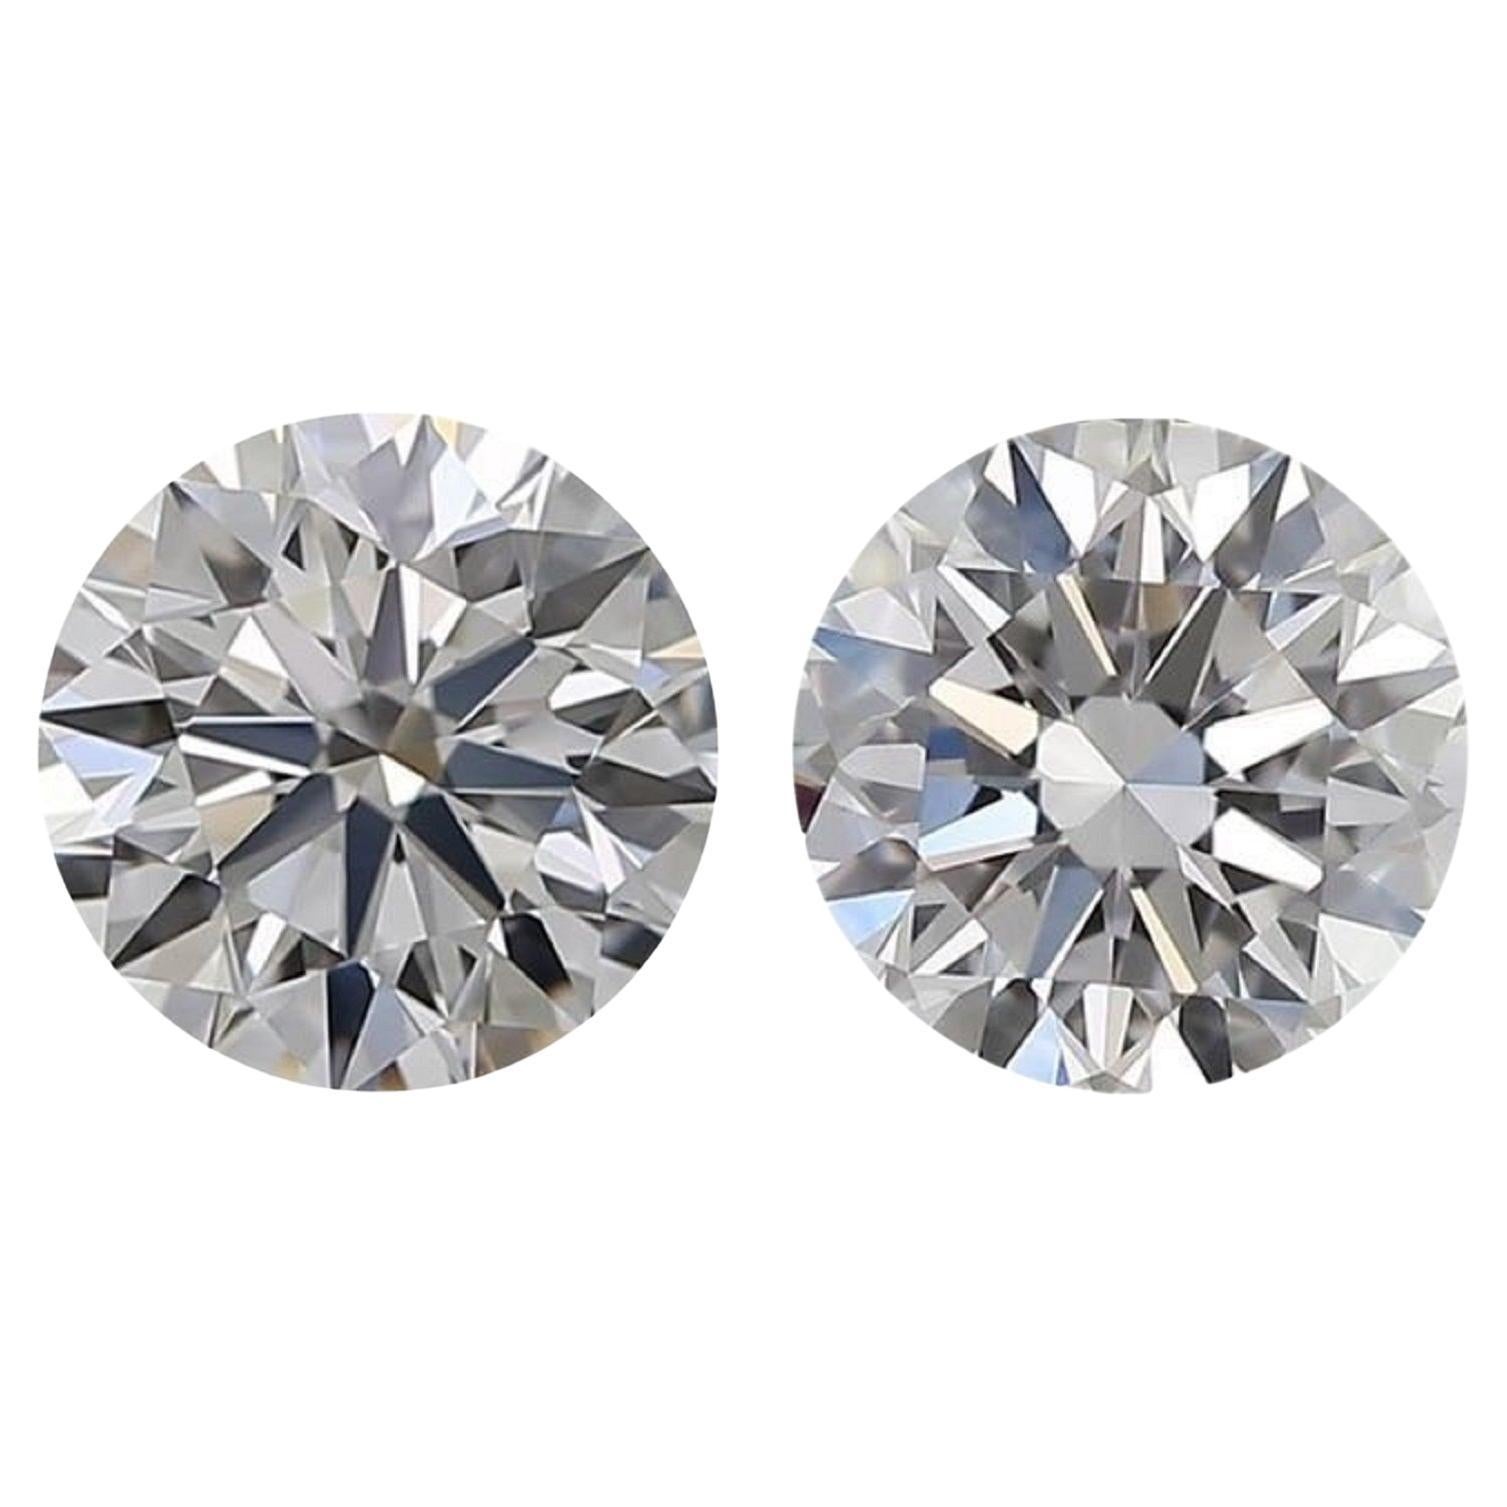 Dazzling 2 Pcs Natural Diamonds with 1.80 Ct Round H VVS1, GIA Certificate For Sale